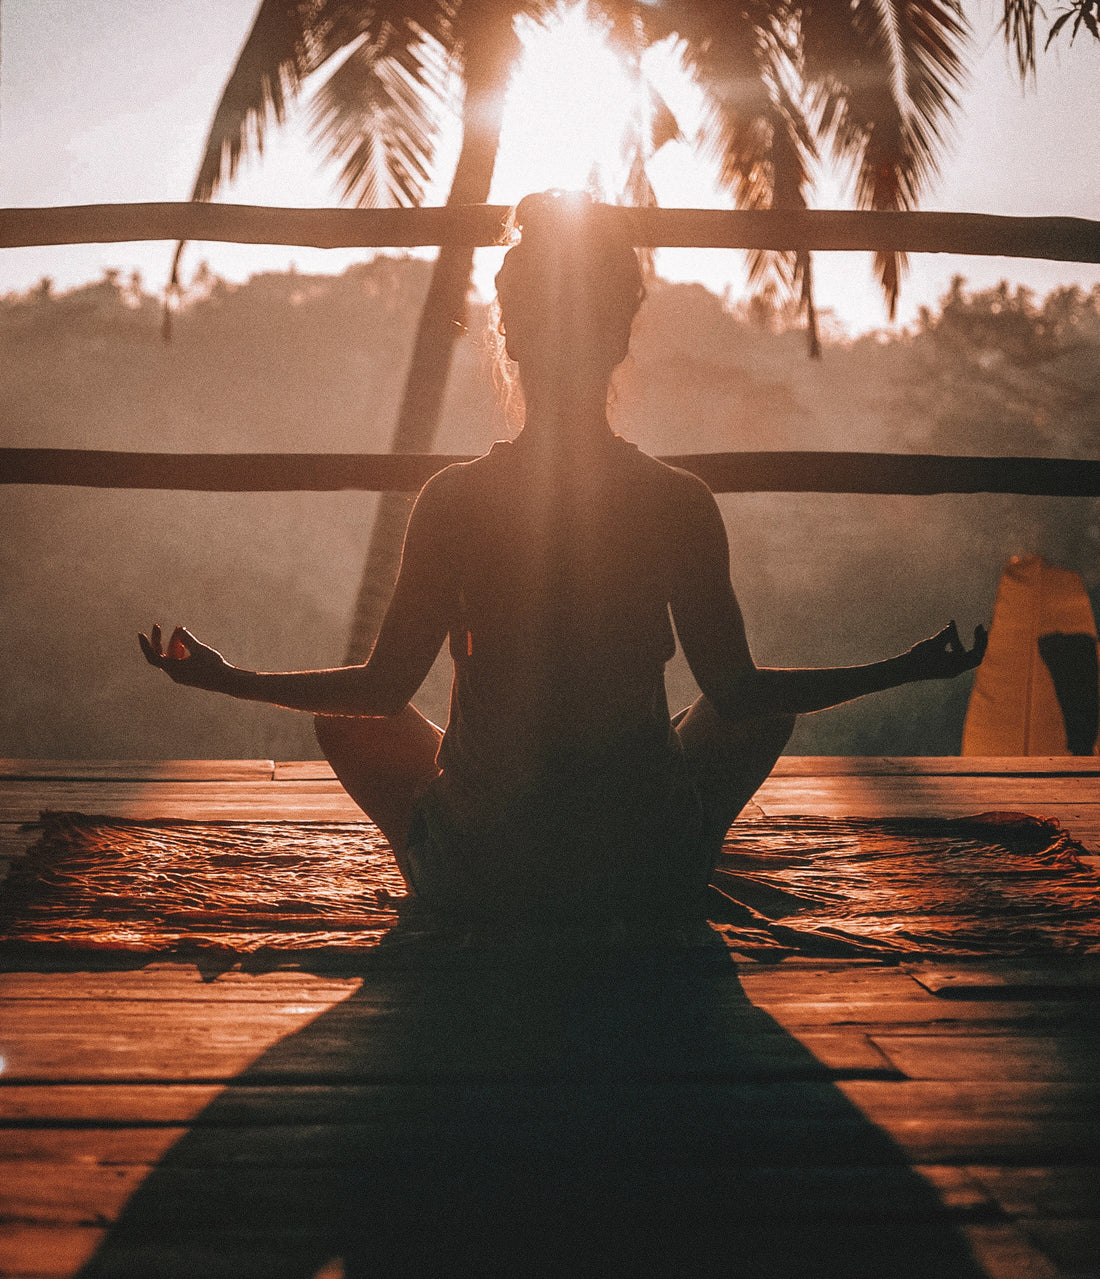 5 EASY WAYS TO MAKE MINDFULNESS A DAILY HABIT